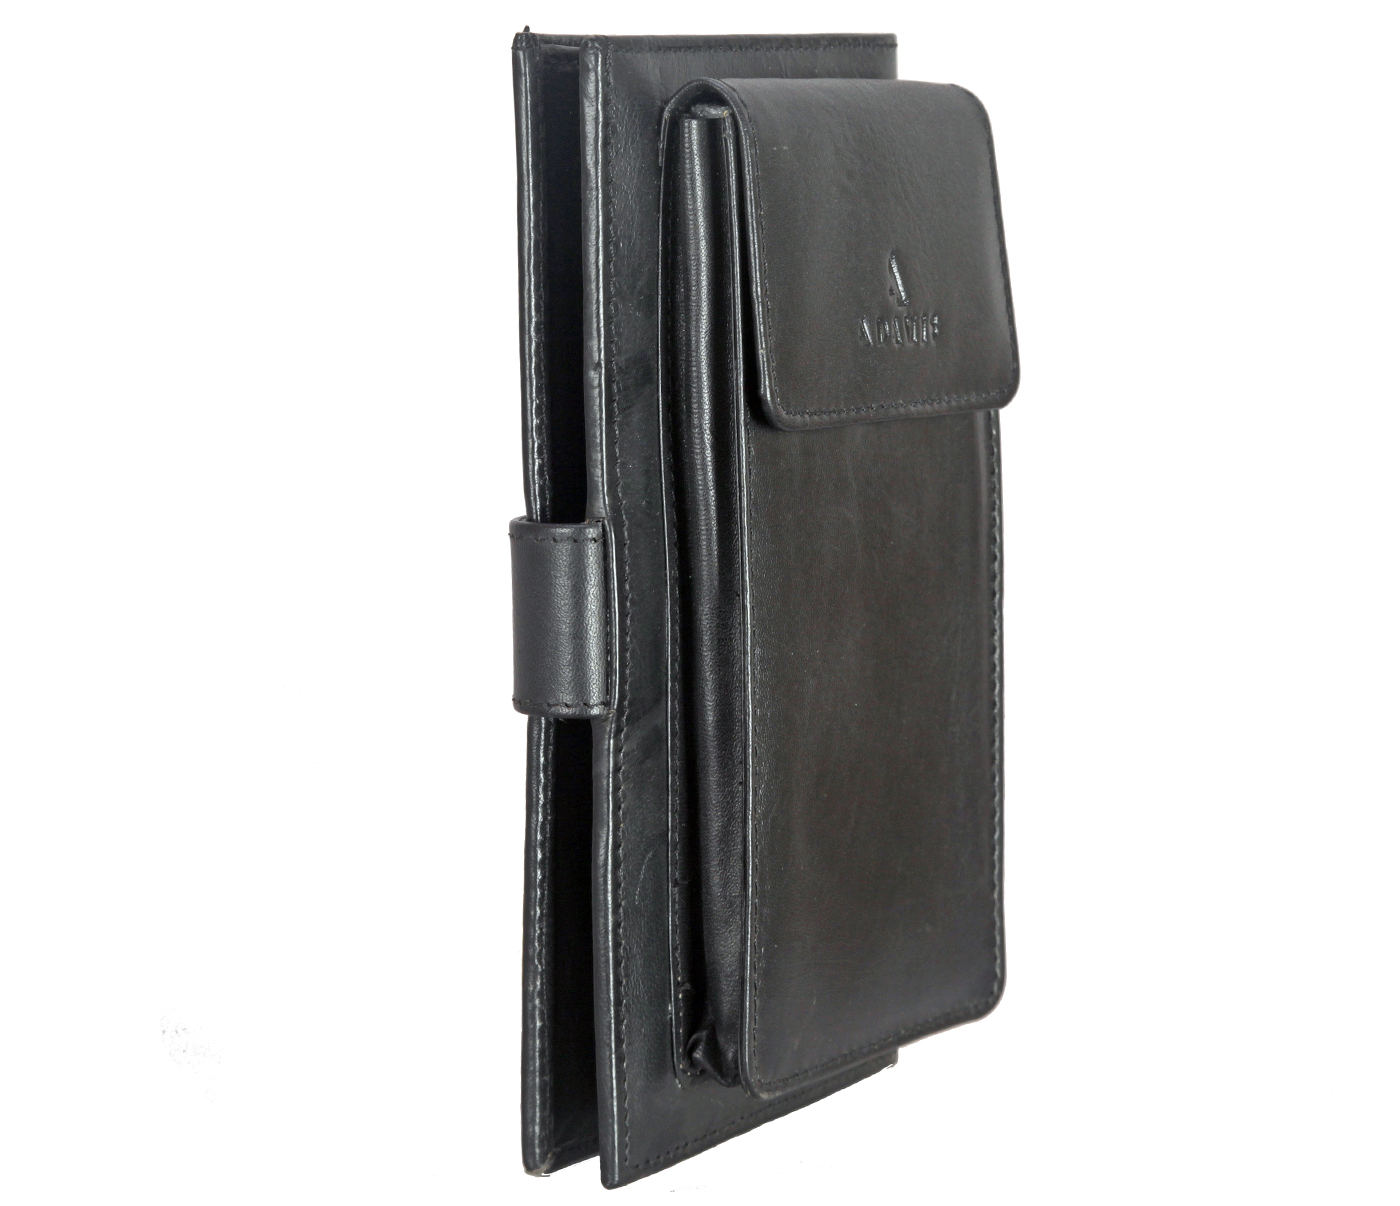 Wallet-Cameron-Women's wallet with mobile holder in Genuine Leather - Black